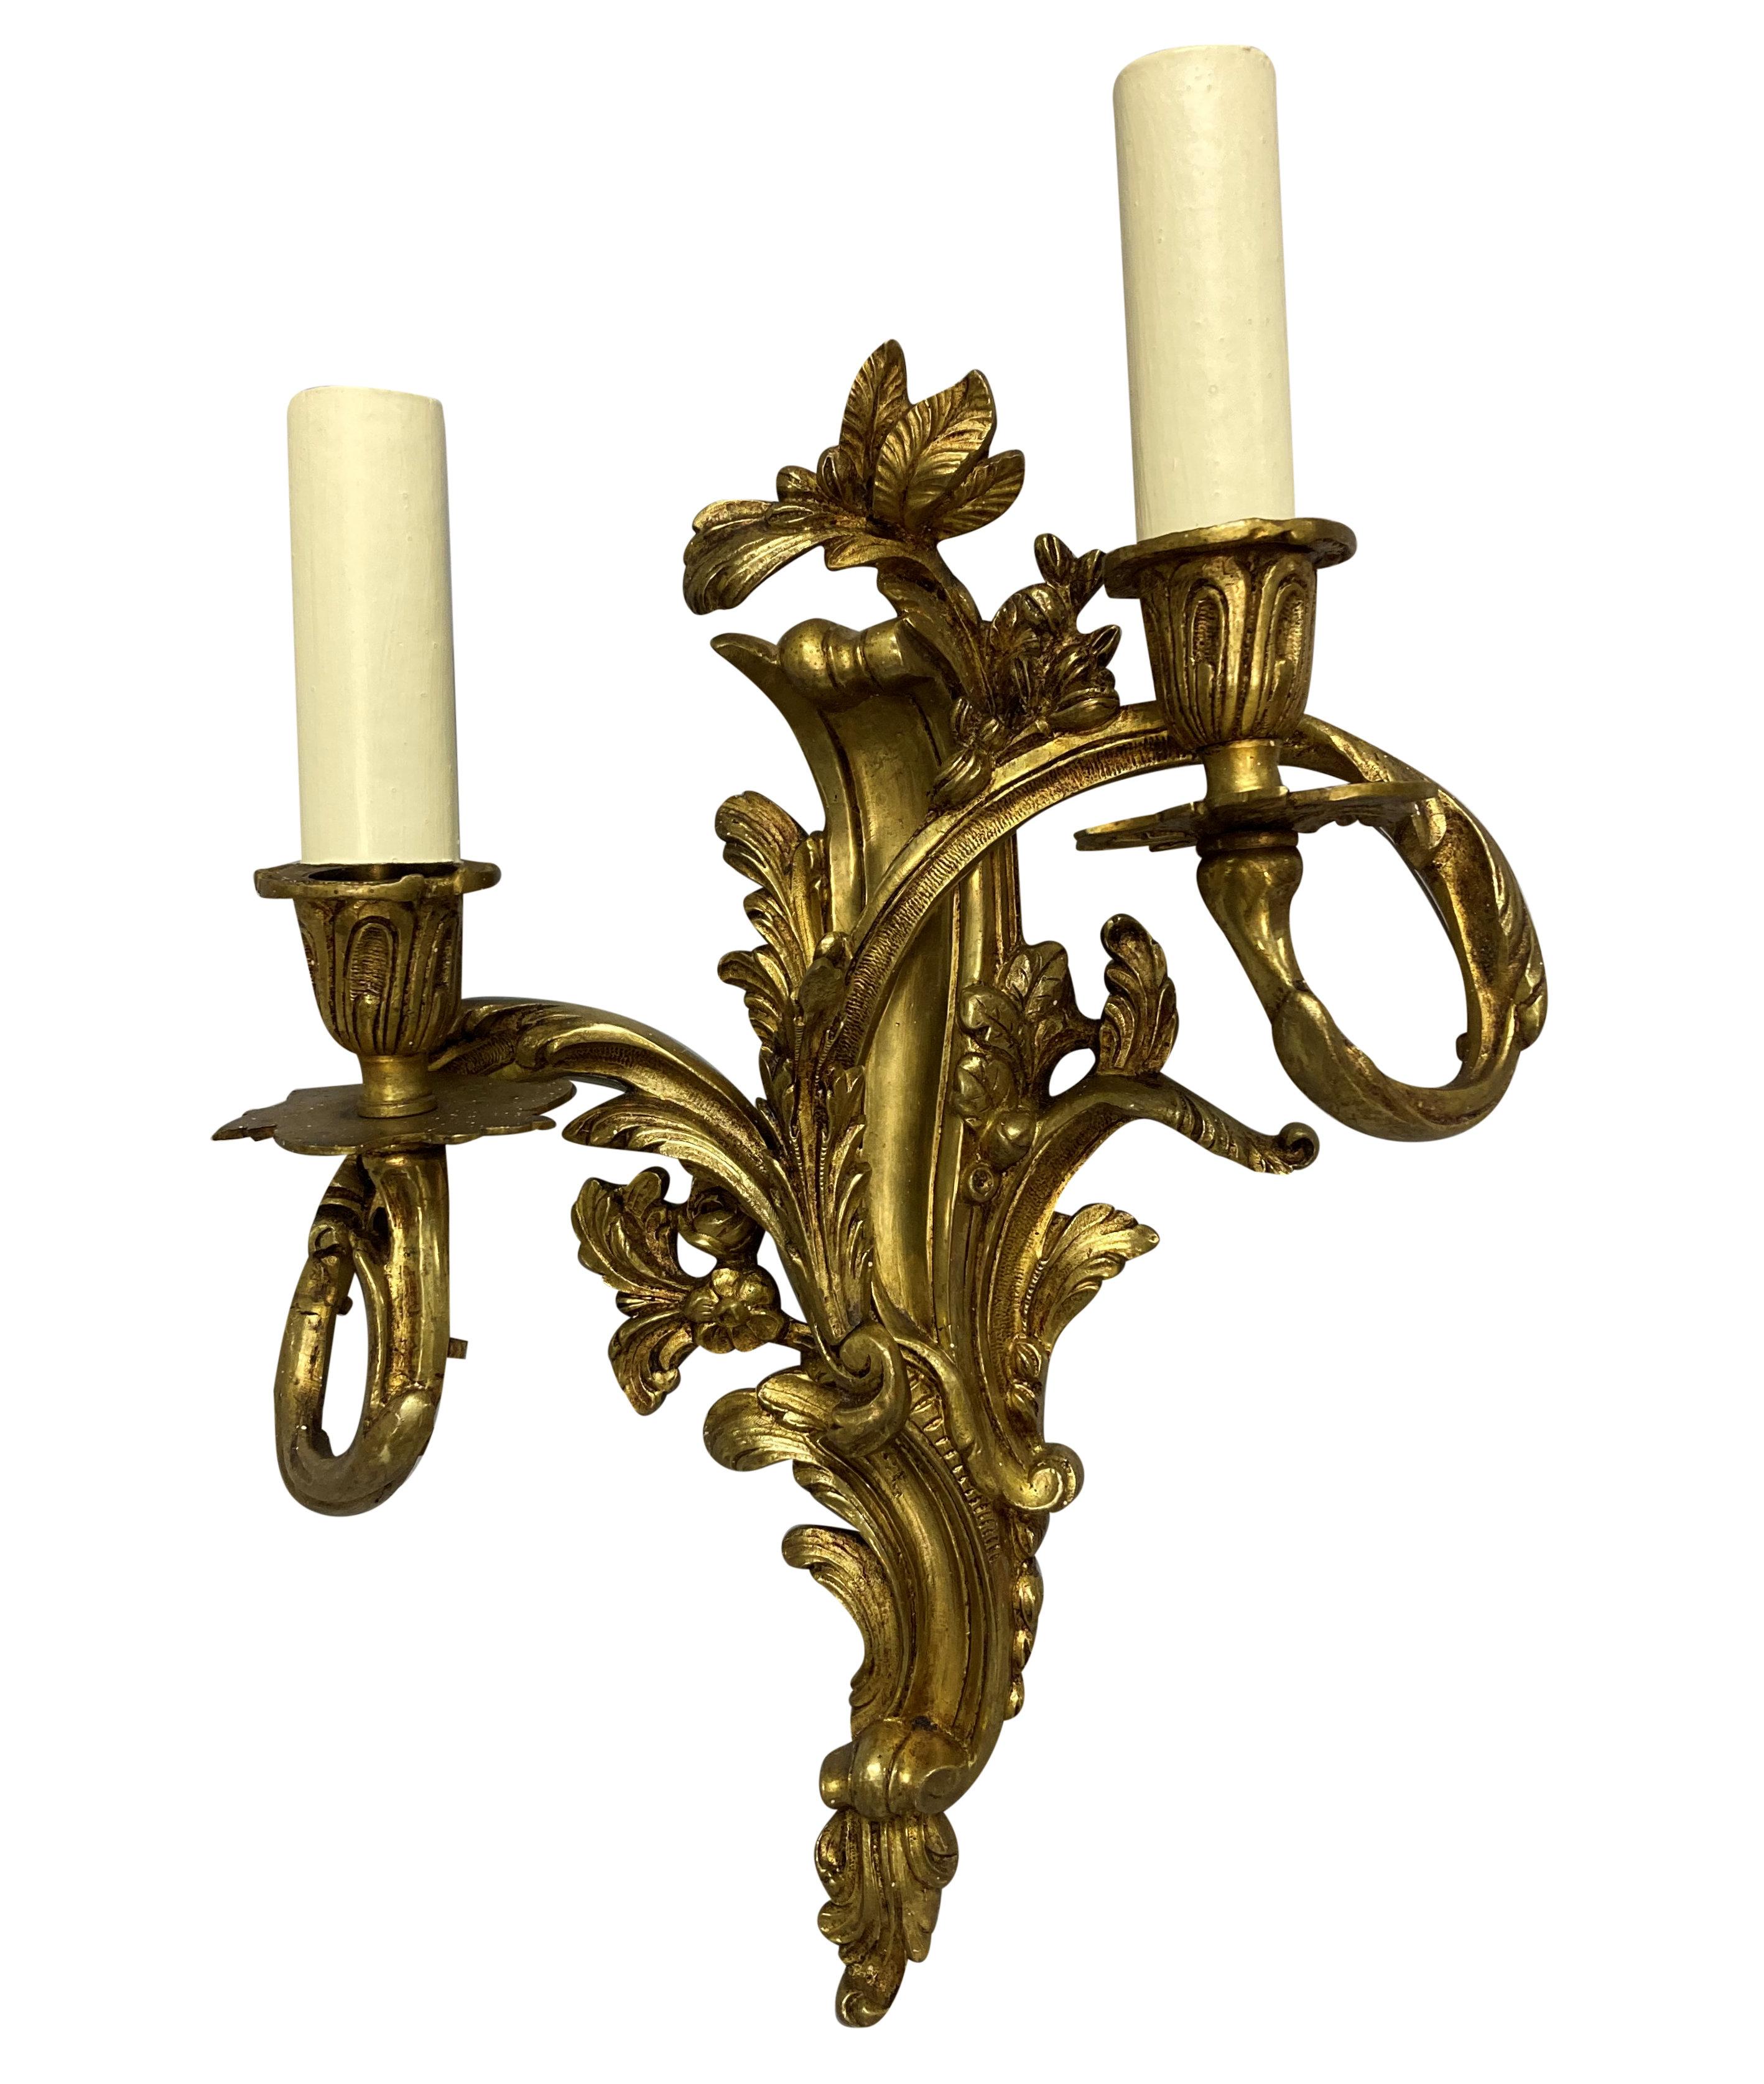 A set of four French Louis XV style gilt bronze, twin branch wall sconces. Newly electrified.